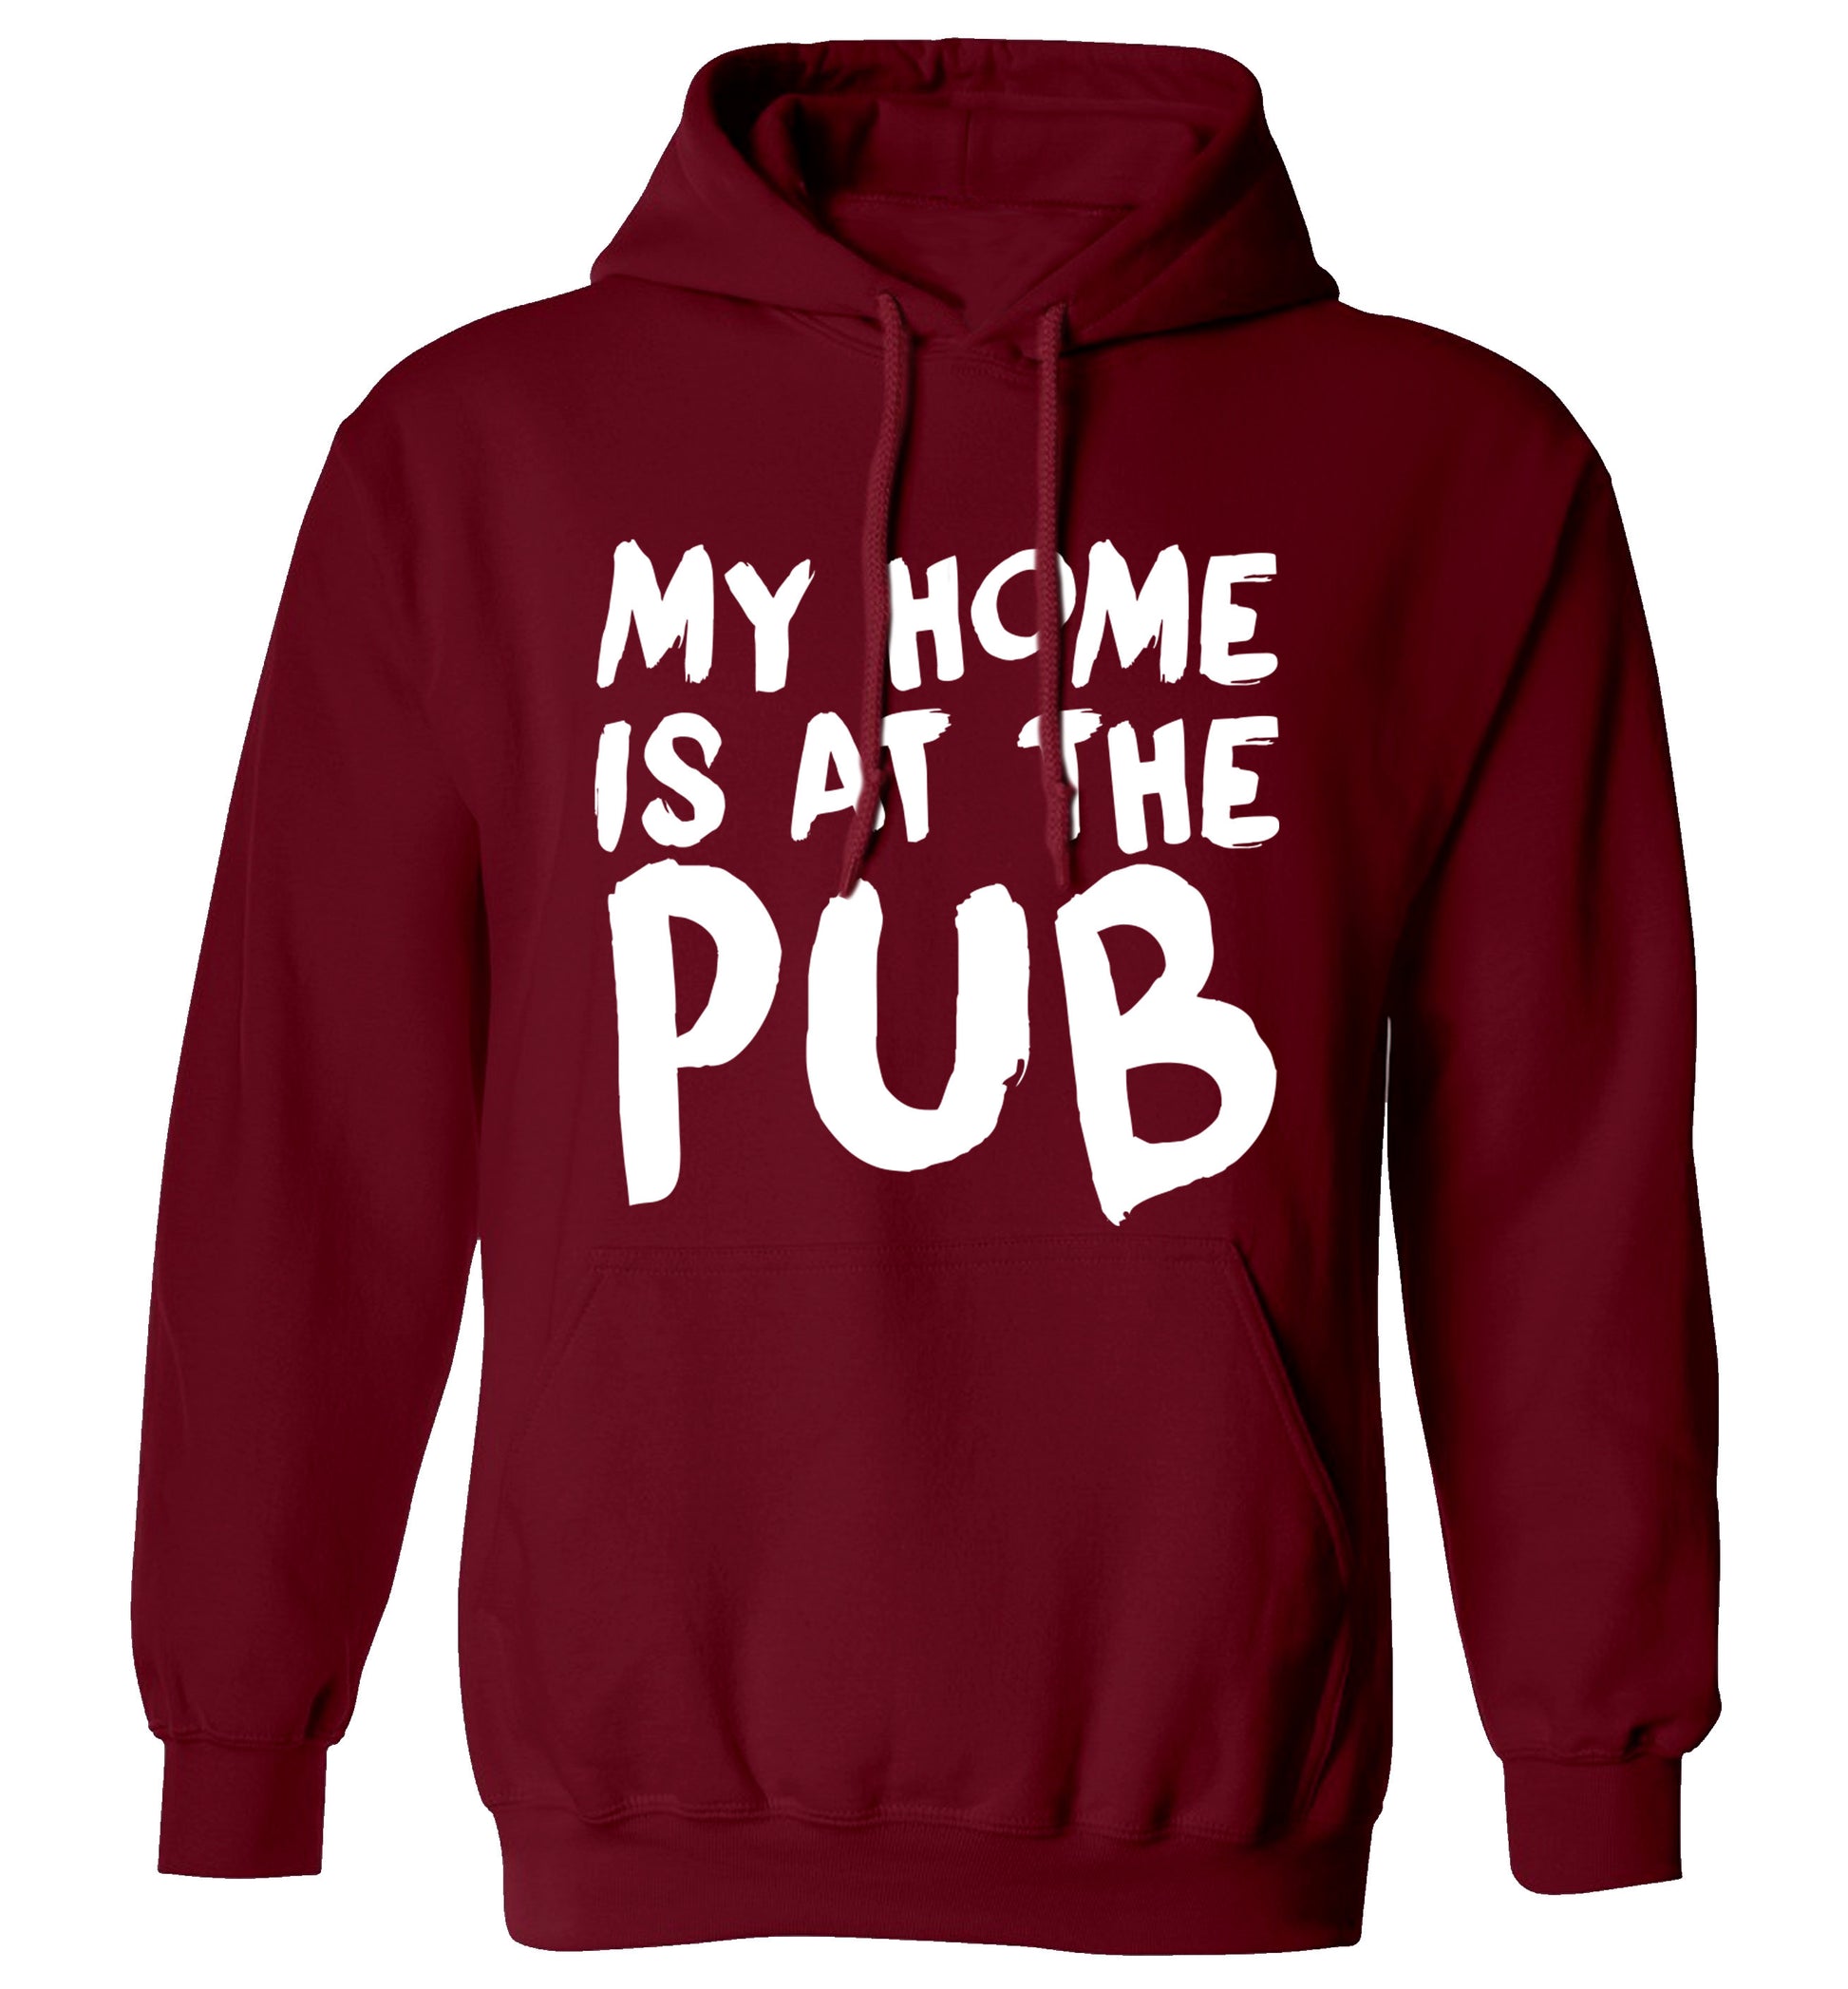 My home is at the pub adults unisex maroon hoodie 2XL